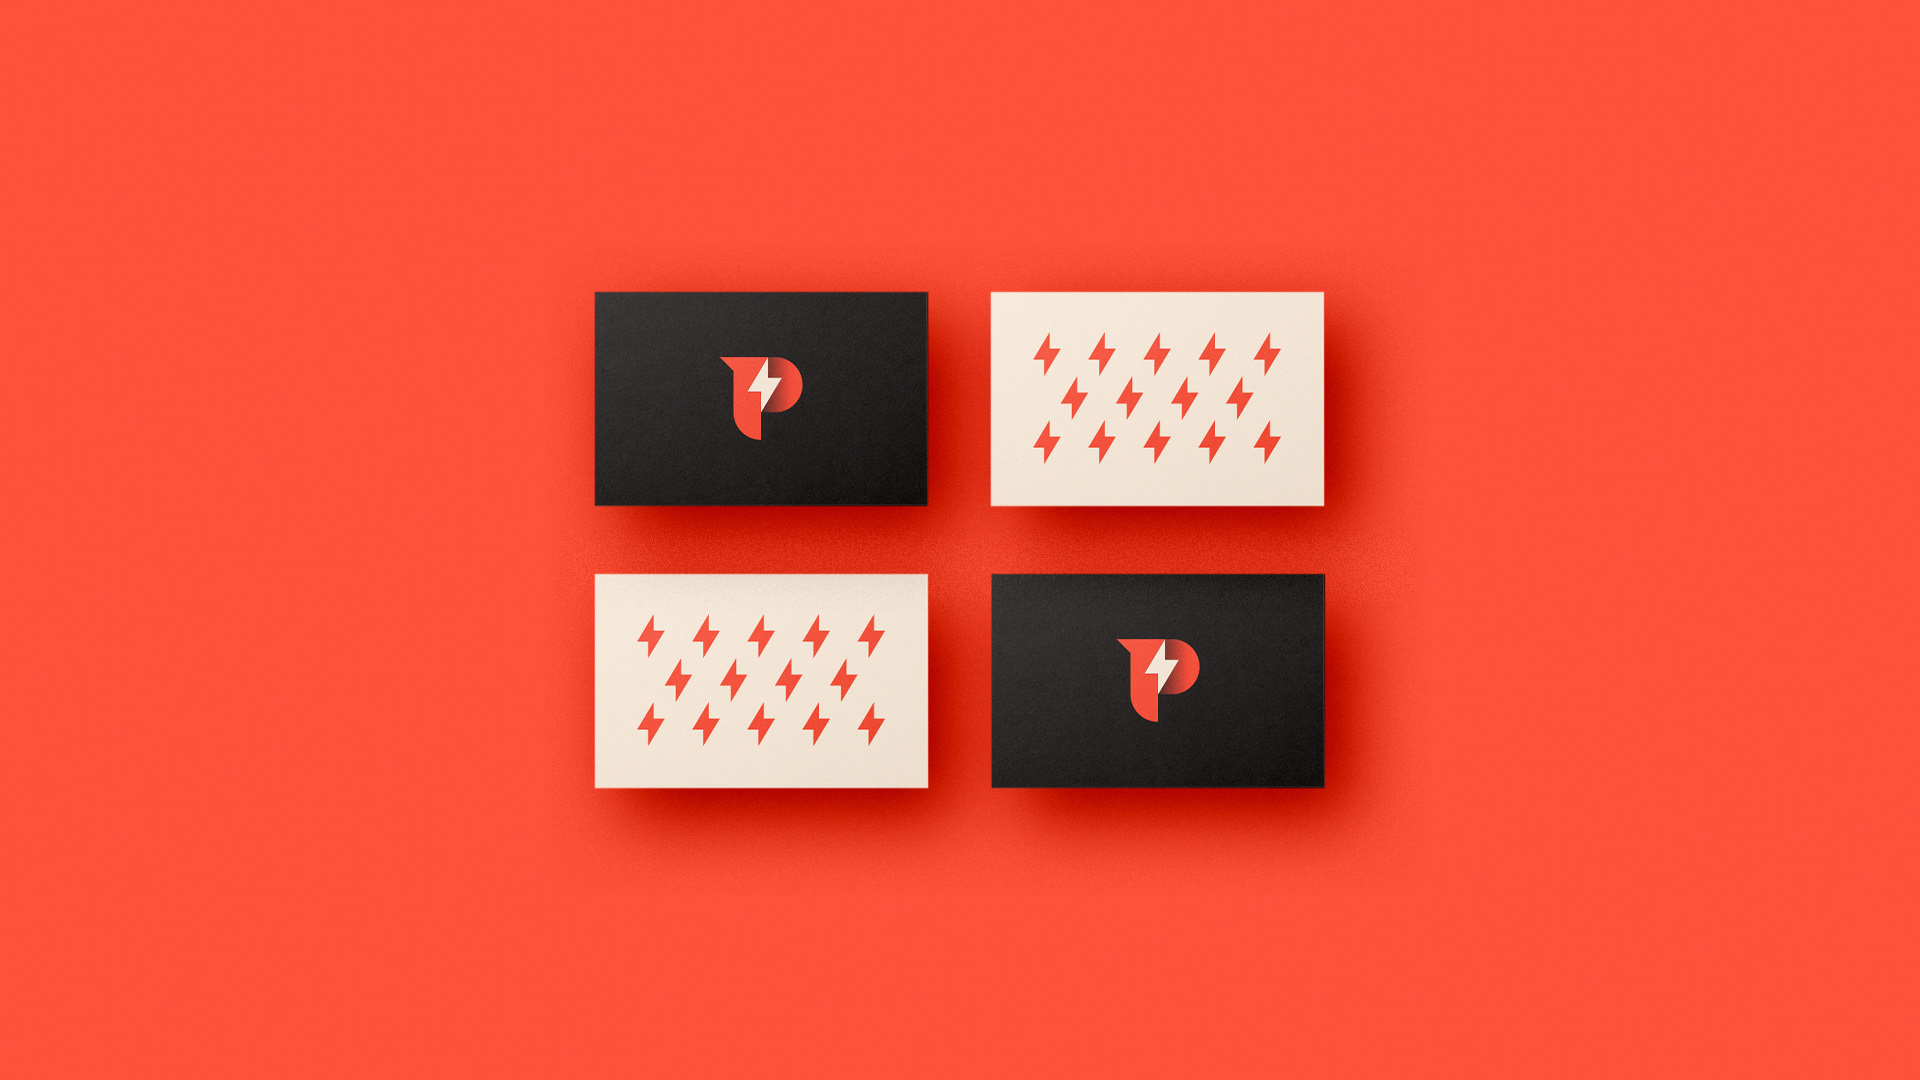 Branding and Visual Identity for Potency Design